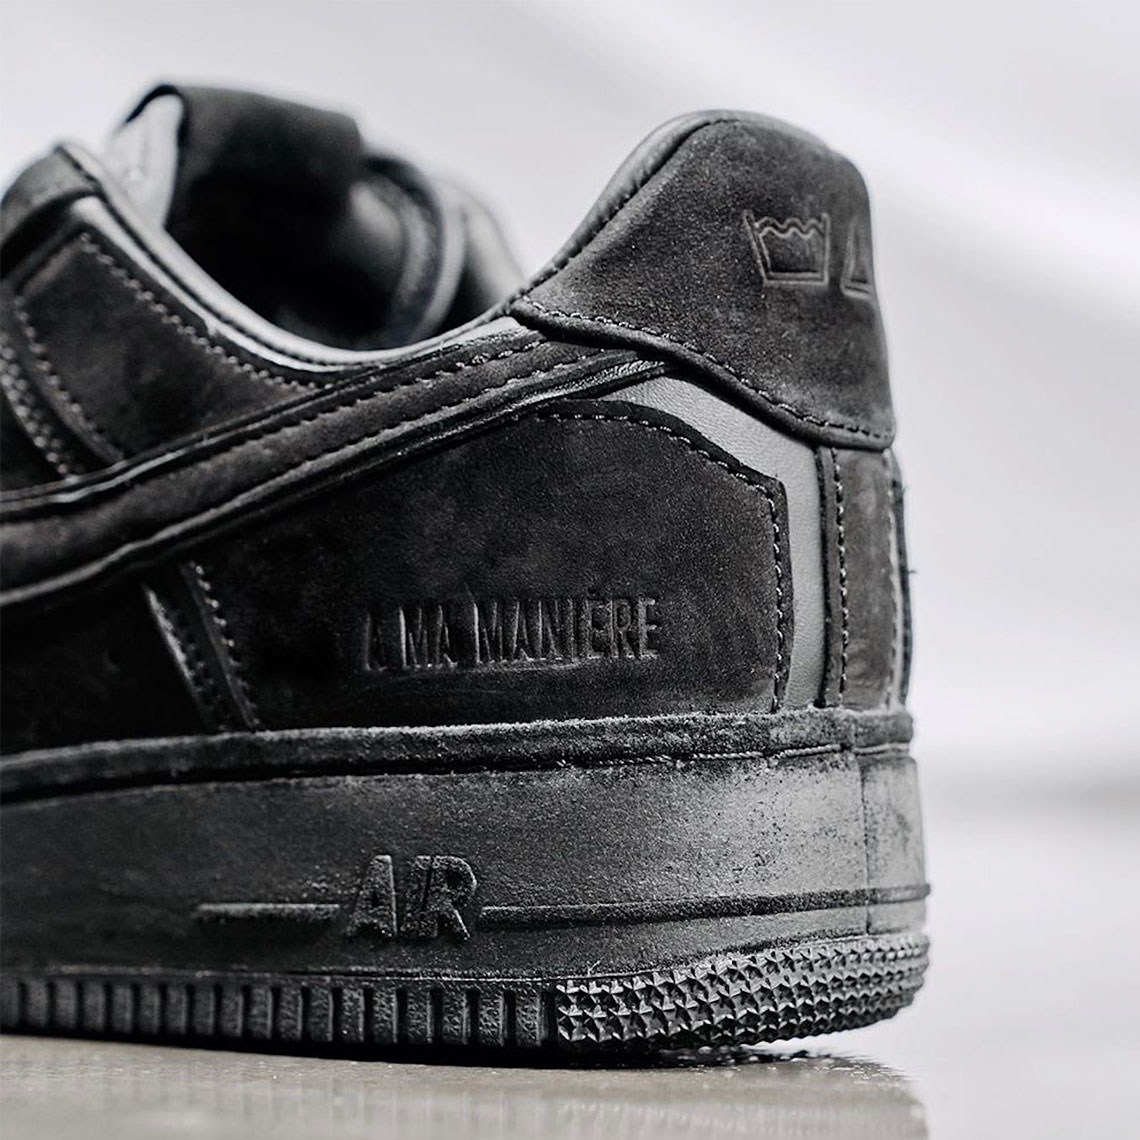 A Maniere Nike Air Force 1 Low Hand Wash Cold Friends Family 4